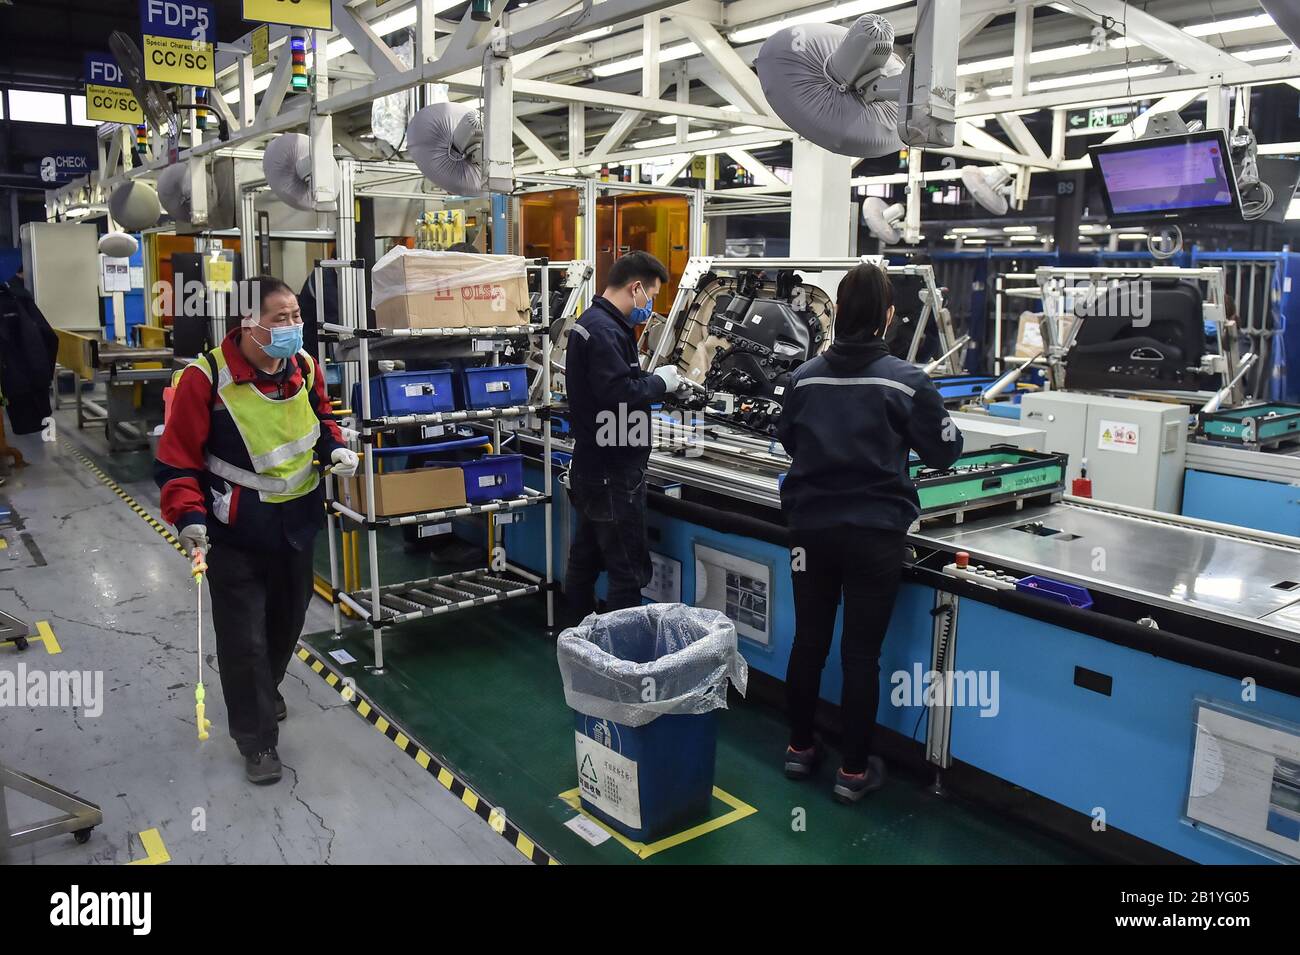 Beijing, China. 12th Feb, 2020. A worker disinfects the assembly line in a workshop of an automotive company in Beijing, capital of China, Feb. 12, 2020. Credit: Peng Ziyang/Xinhua/Alamy Live News Stock Photo